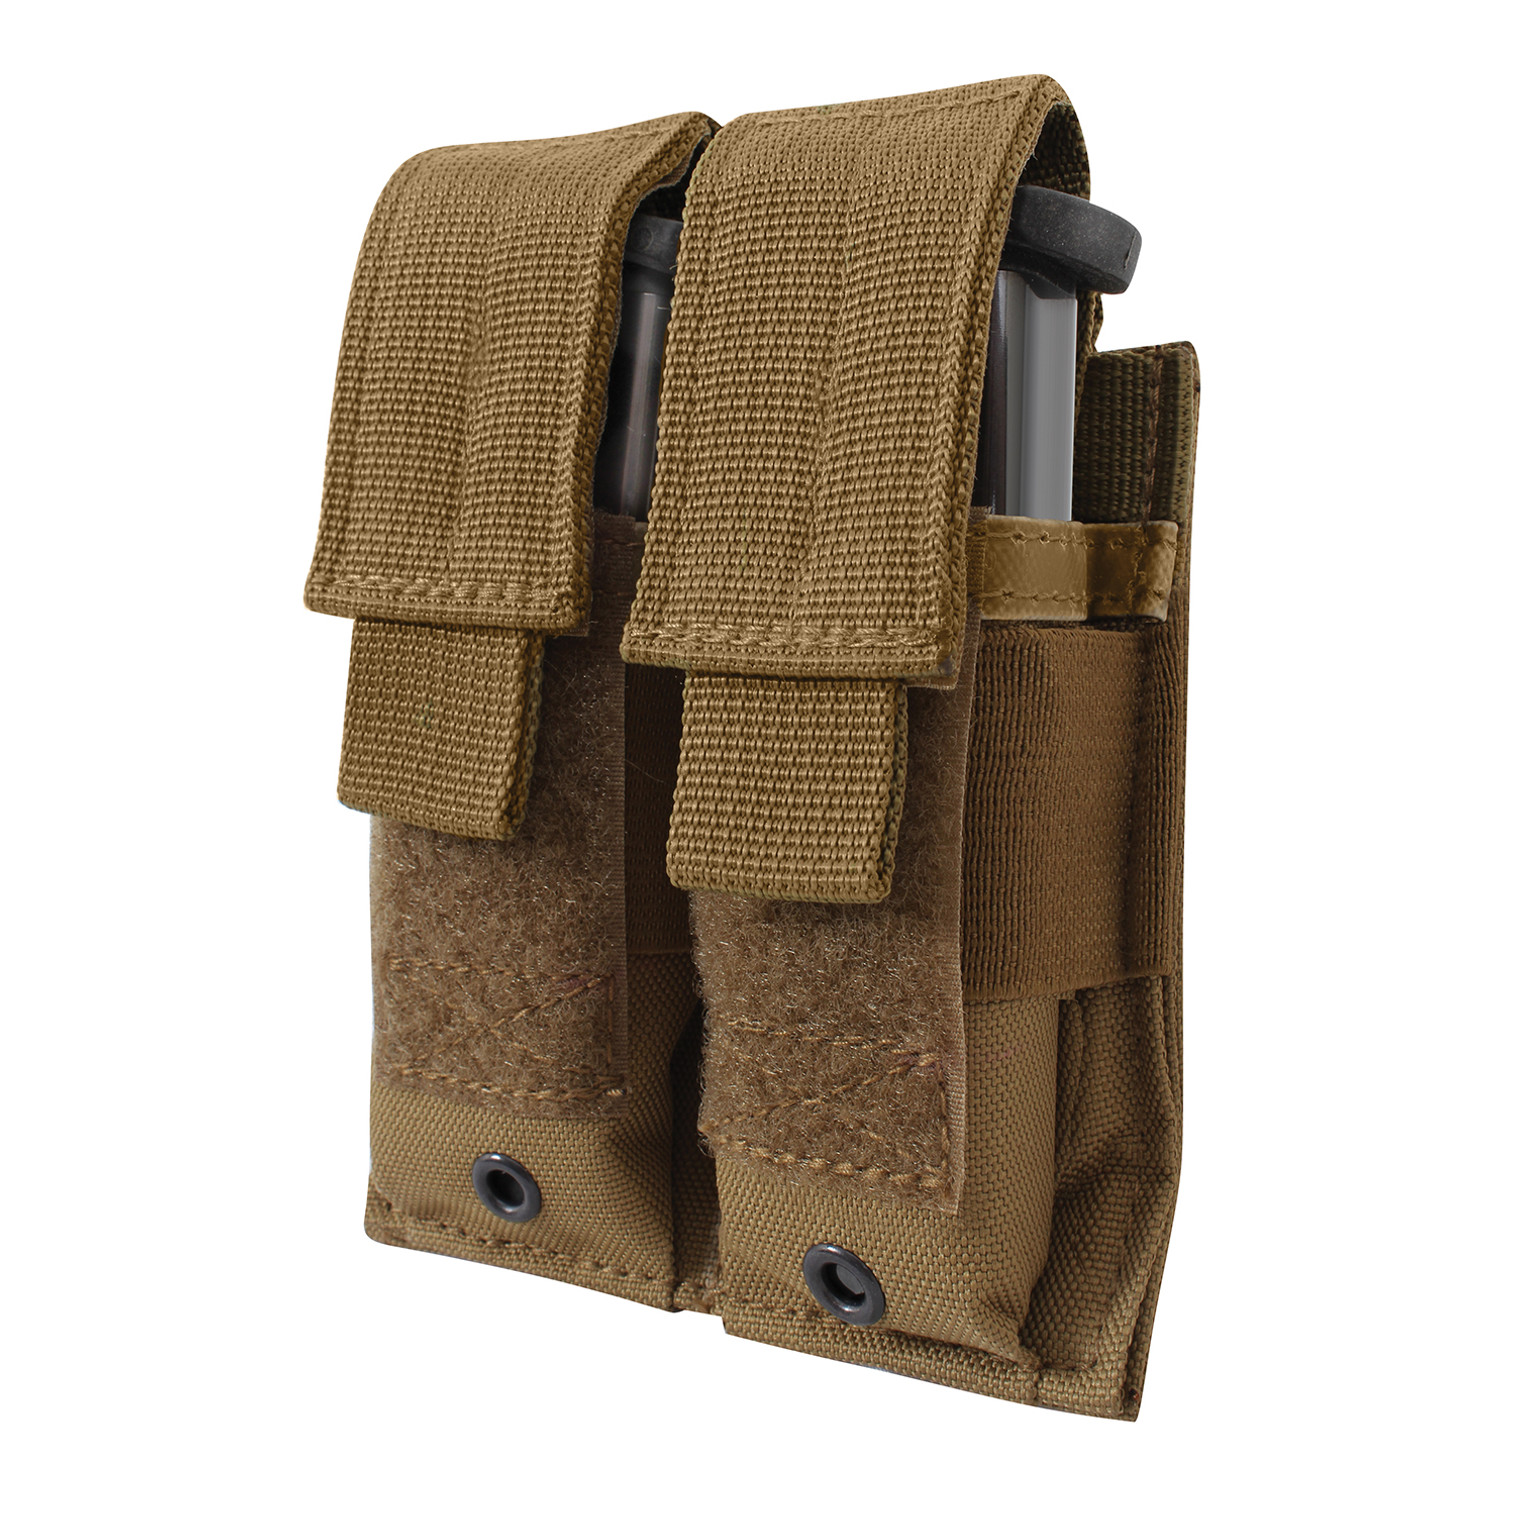 Rothco MOLLE Double Pistol Mag Pouch - Coyote Brown